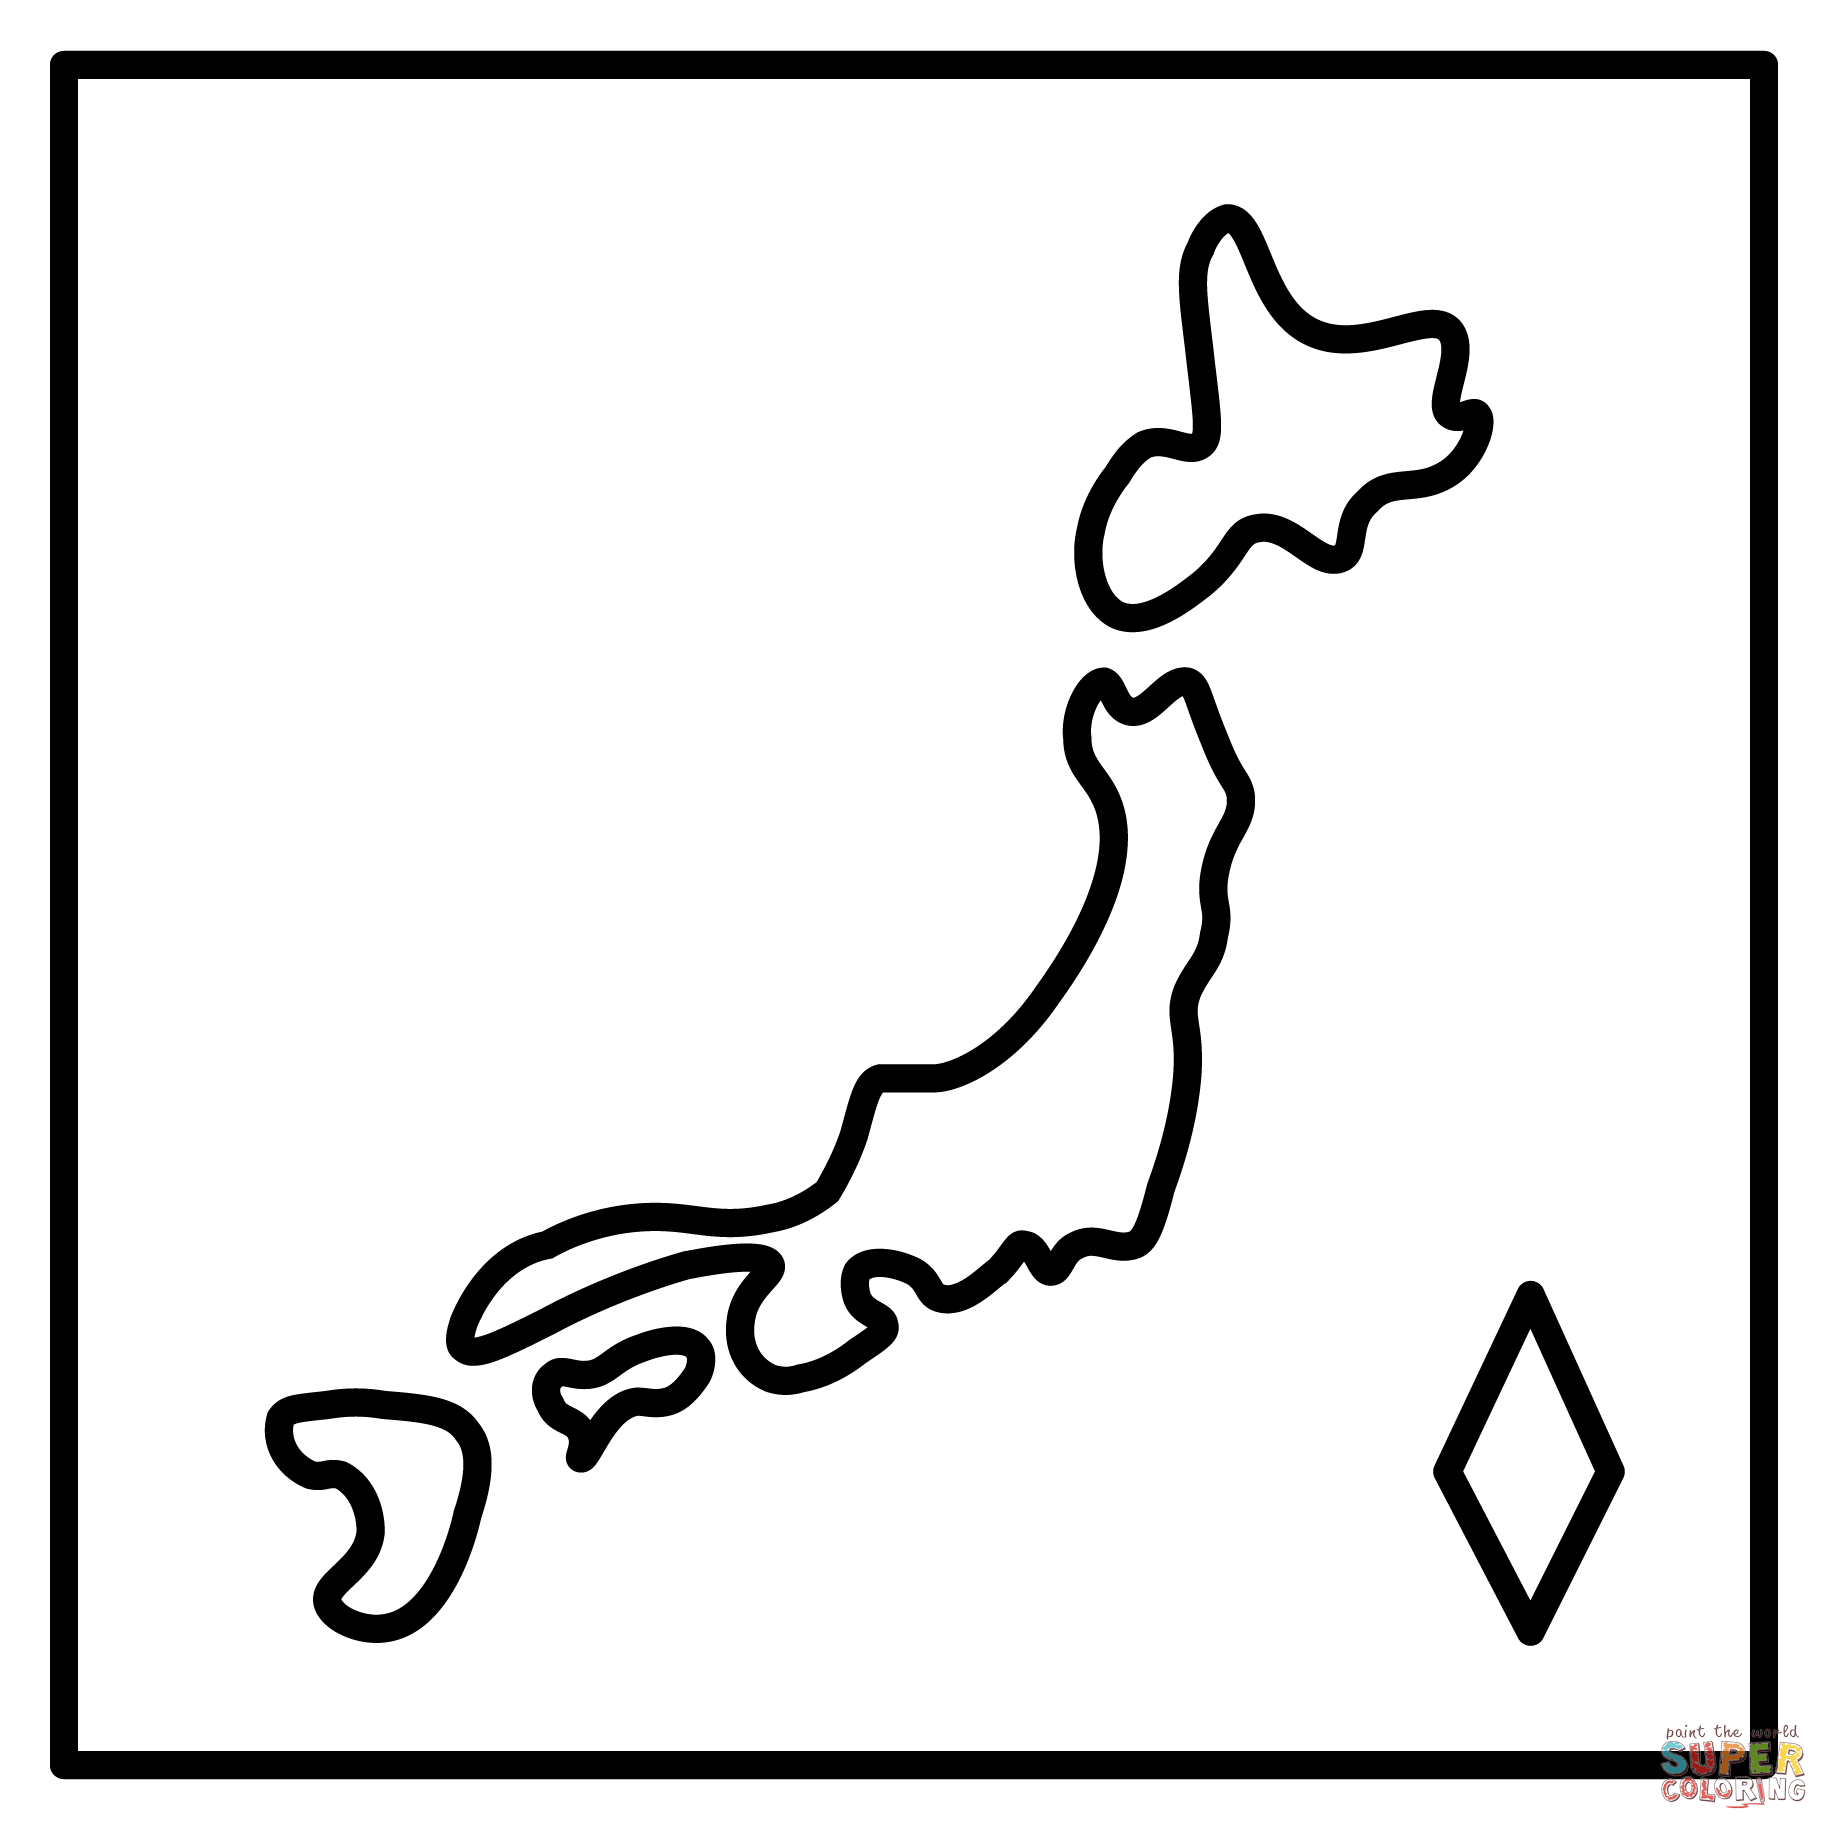 Map of japan emoji coloring page free printable coloring pages